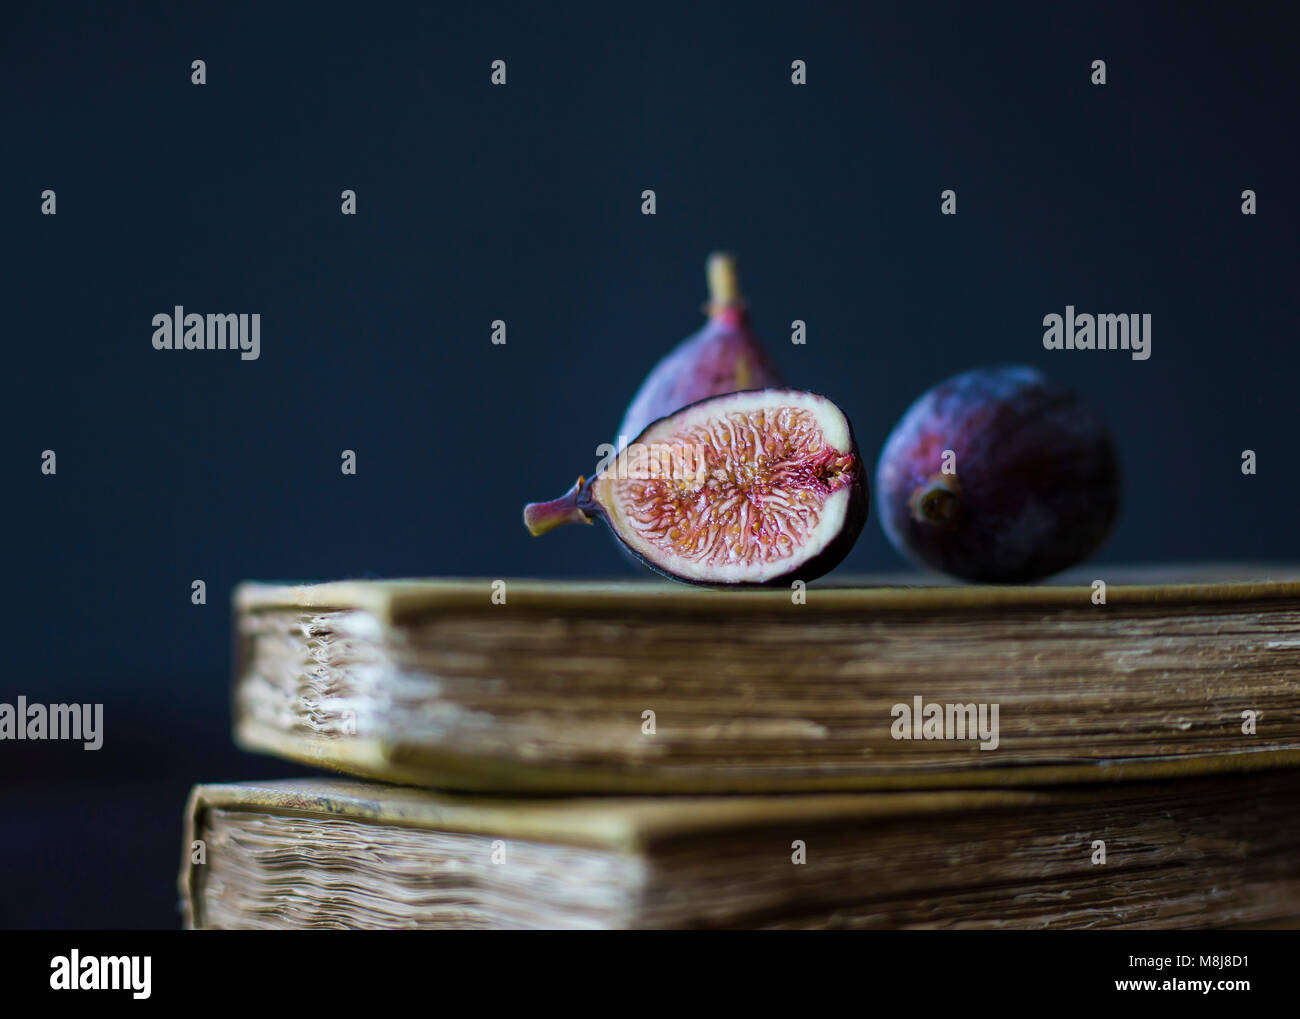 Ripe Figs Positioned on Top of Antique Books Stock Photo